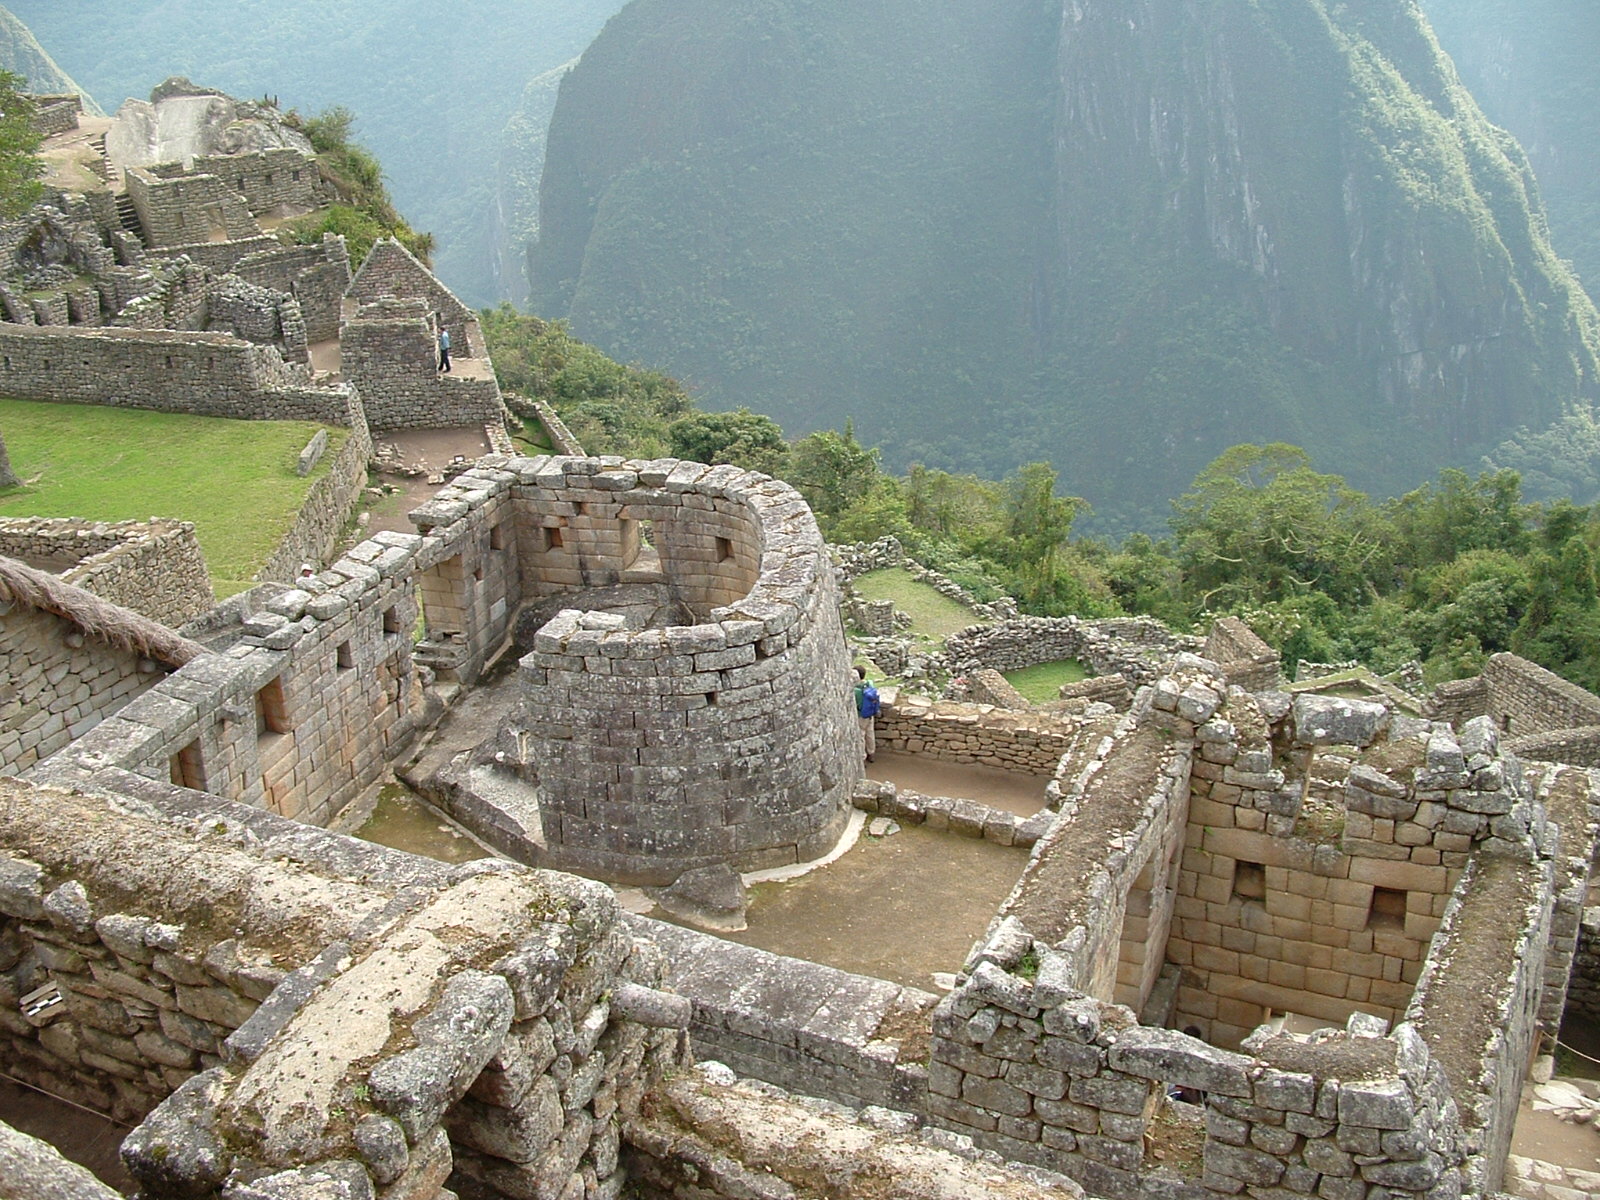 machu picchu is part of what ancient civilization and where is it